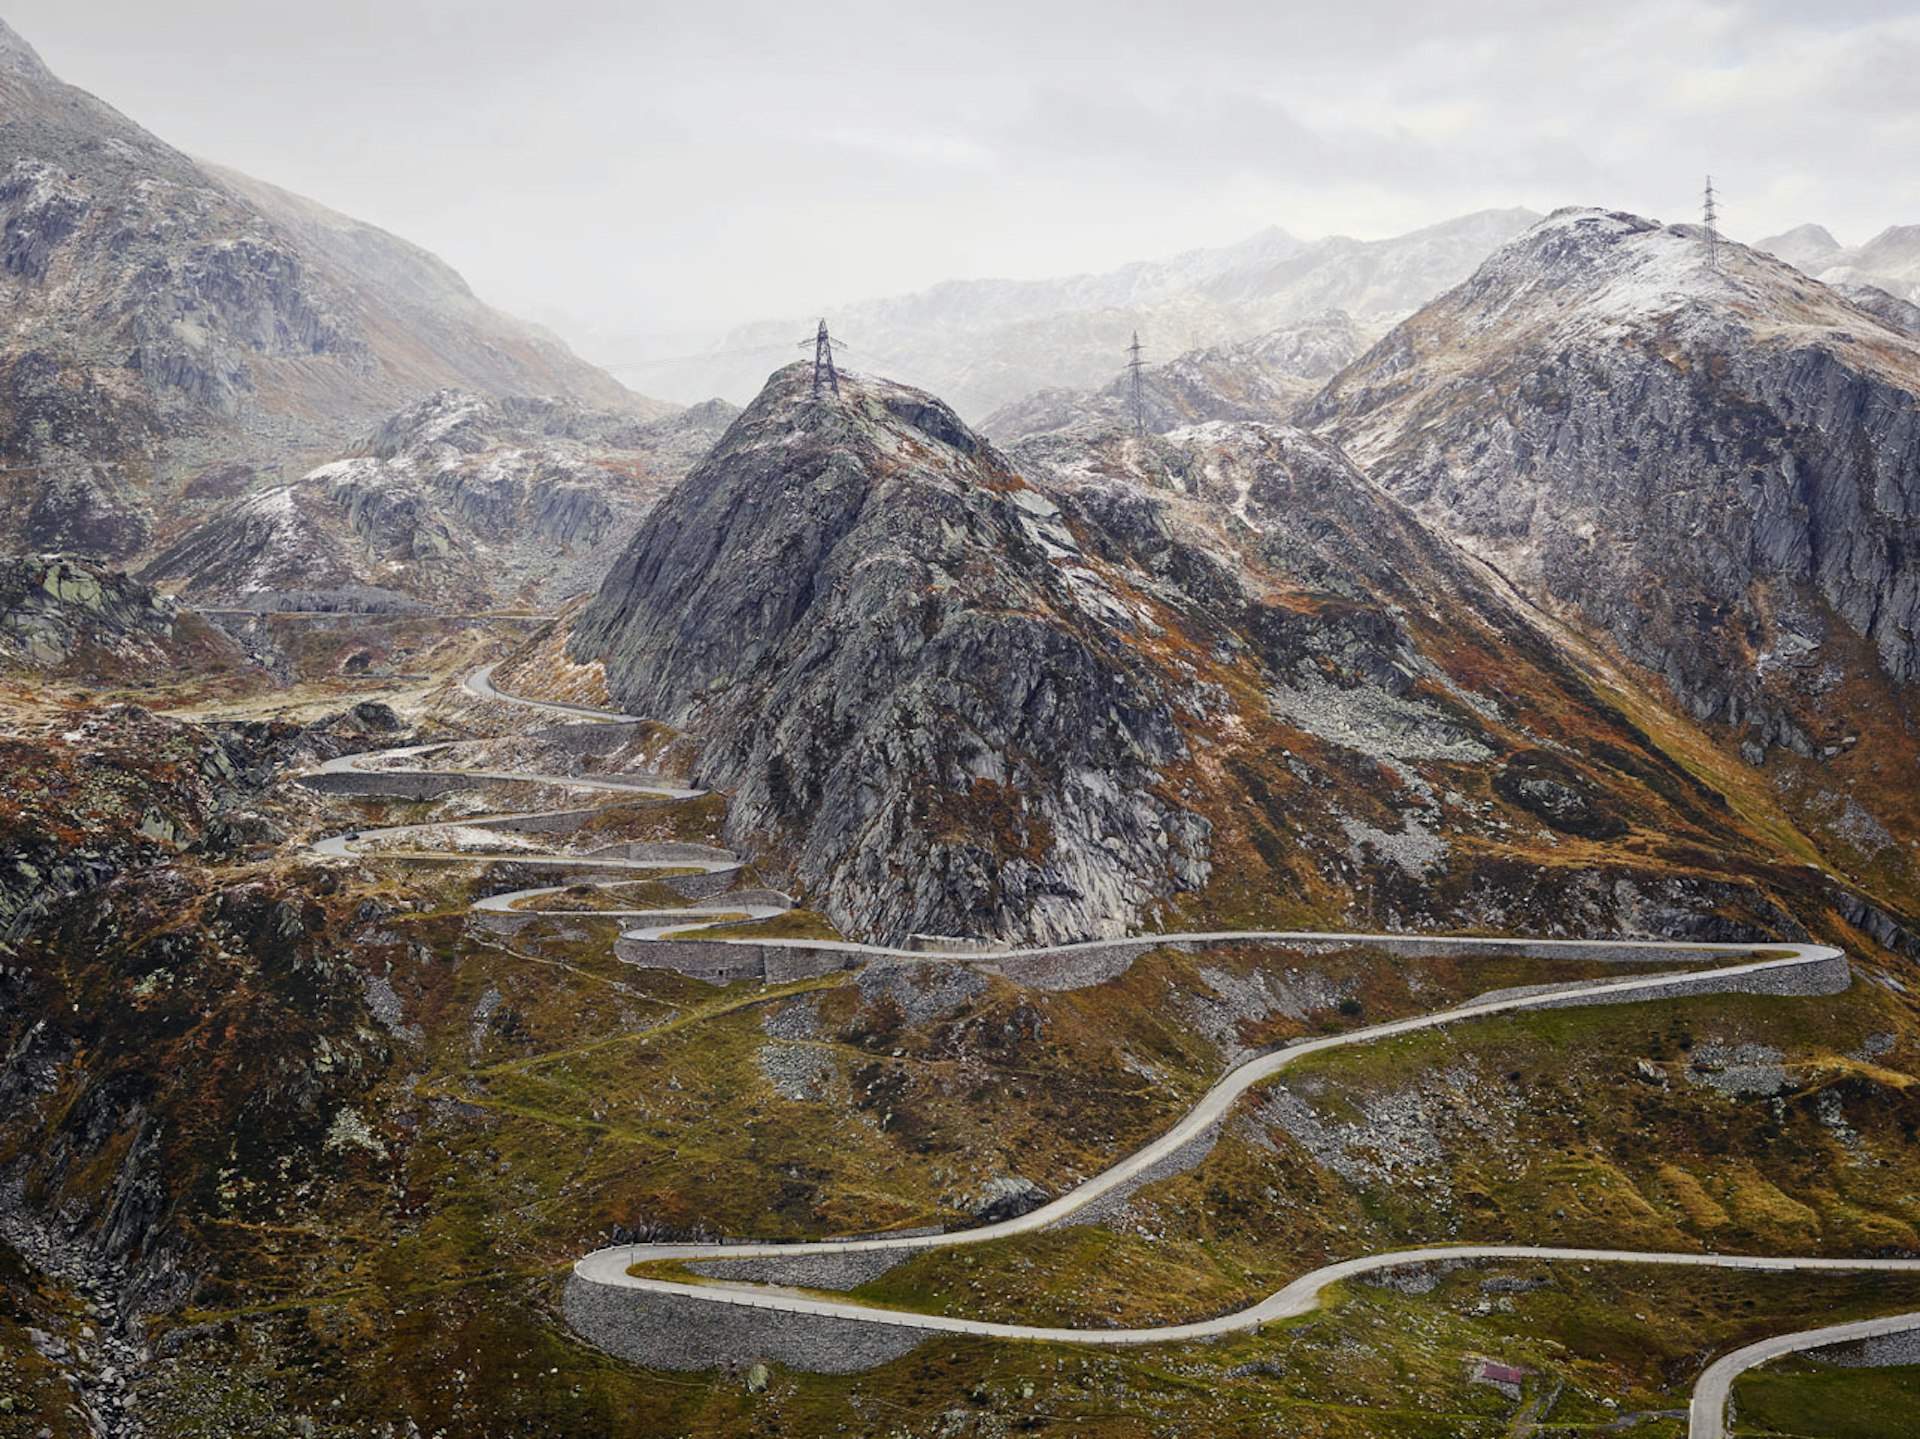 Europe’s most epic mountain cycling climbs